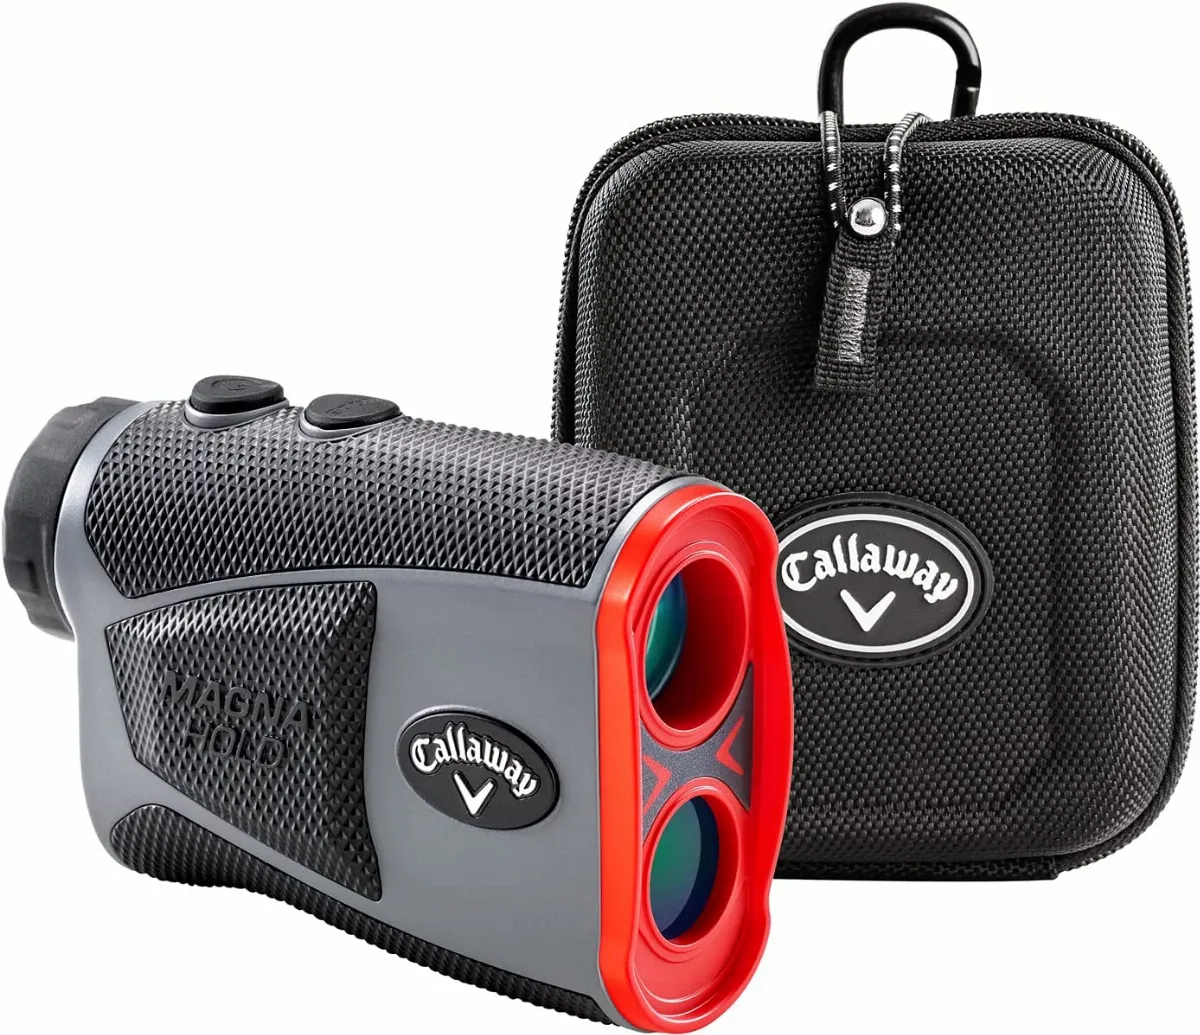 Callaway 300 Pro Slope Laser Golf Rangefinder Enhanced 2021 Model Now  With Added Features Lazada